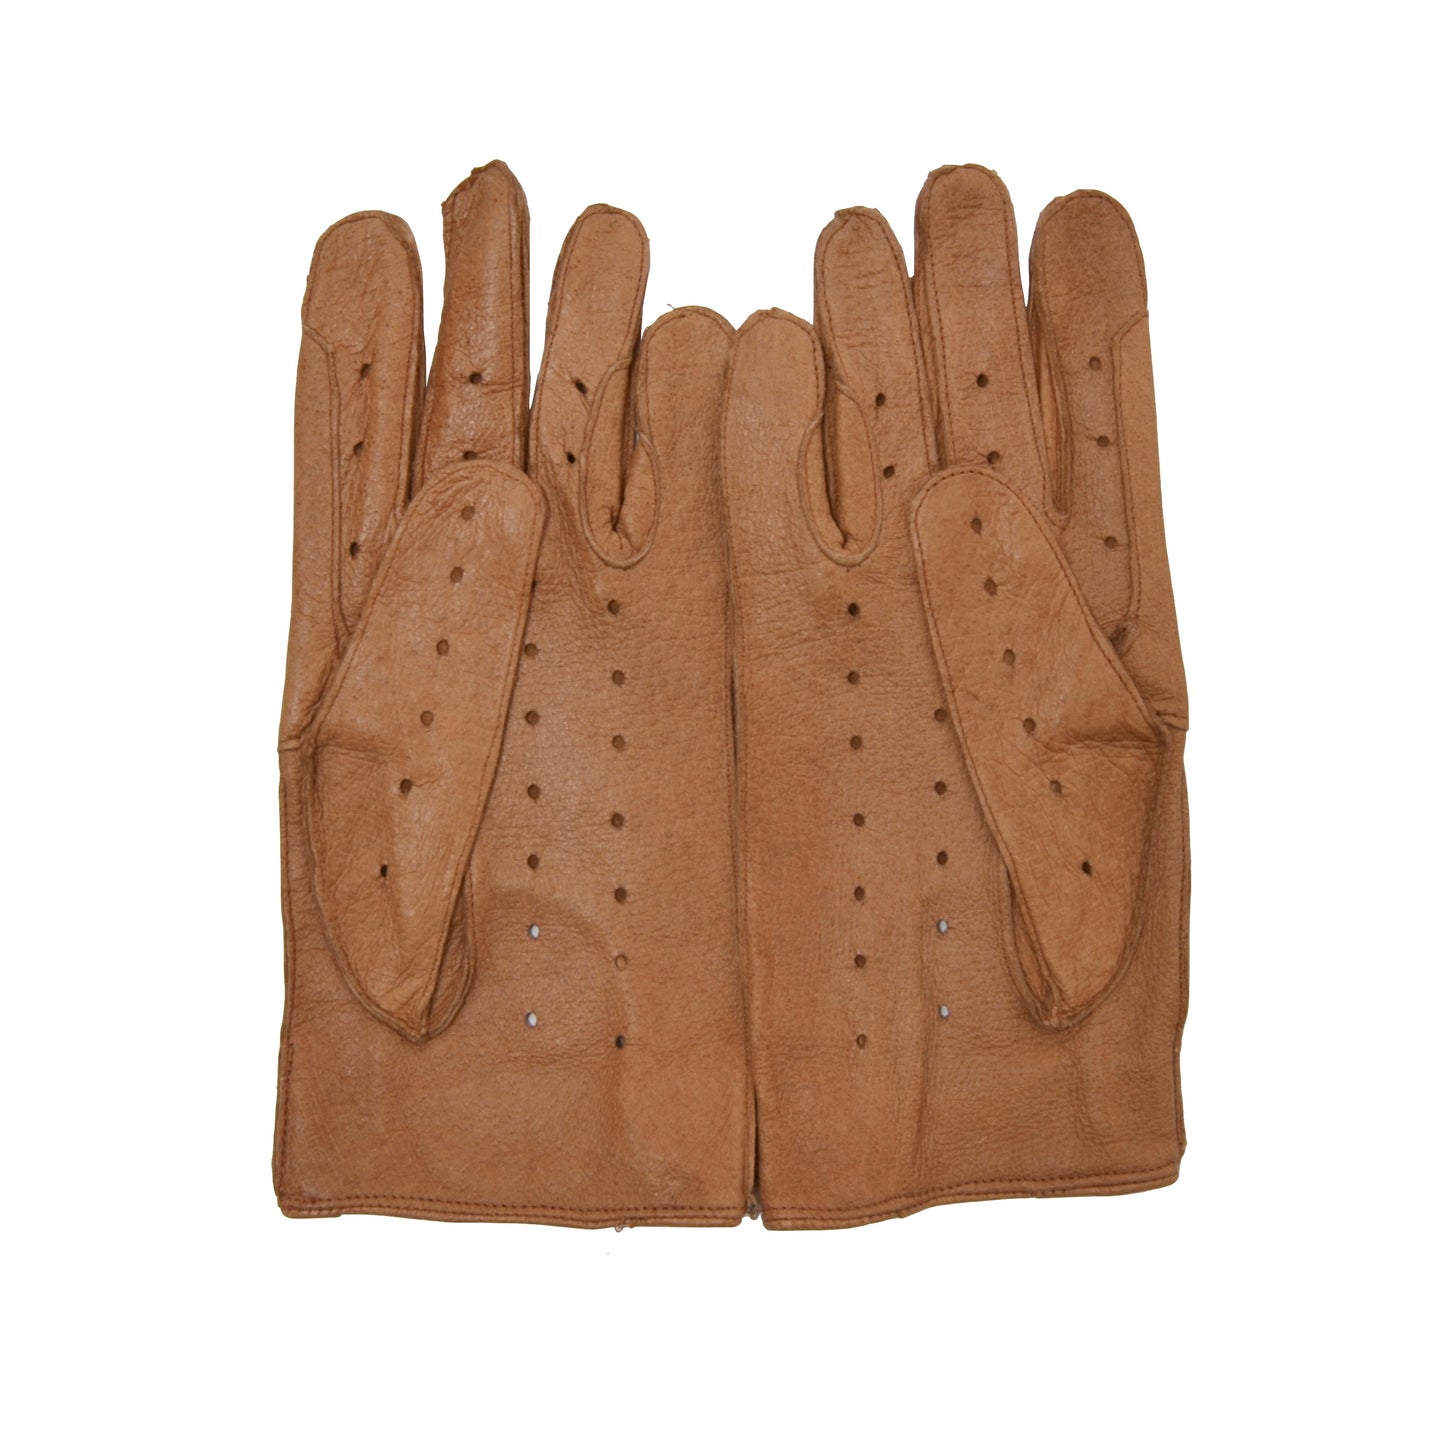 Unlined Leather Driving Gloves Size 8.5 - Tan